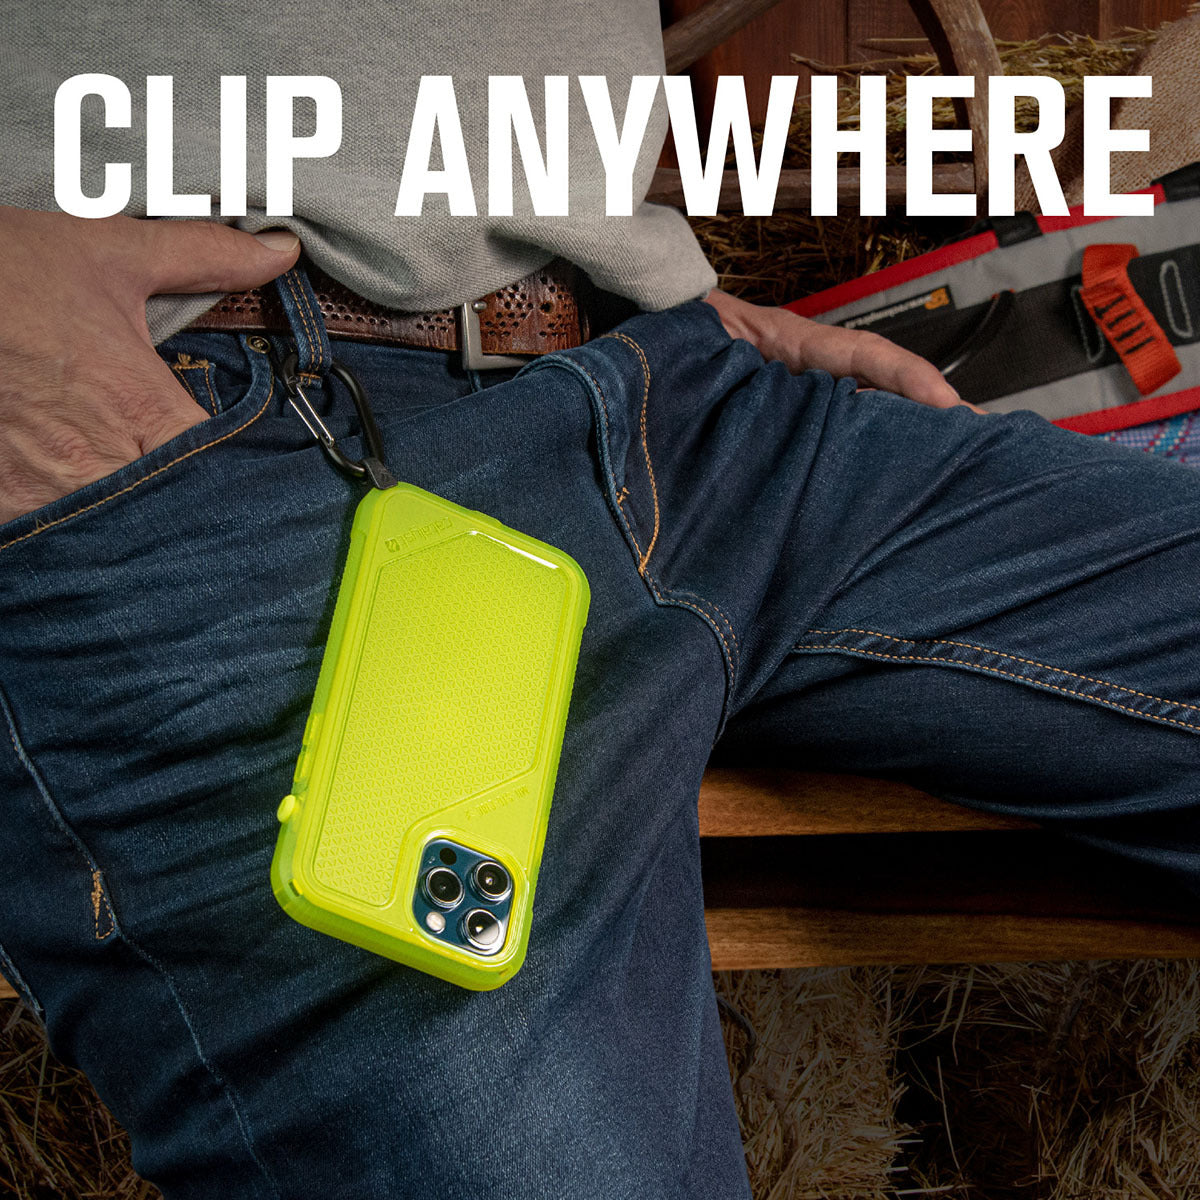 Catalyst carabiner attachment attached on pants lime green with lime green iPhone hanging Text reads clip anywhere